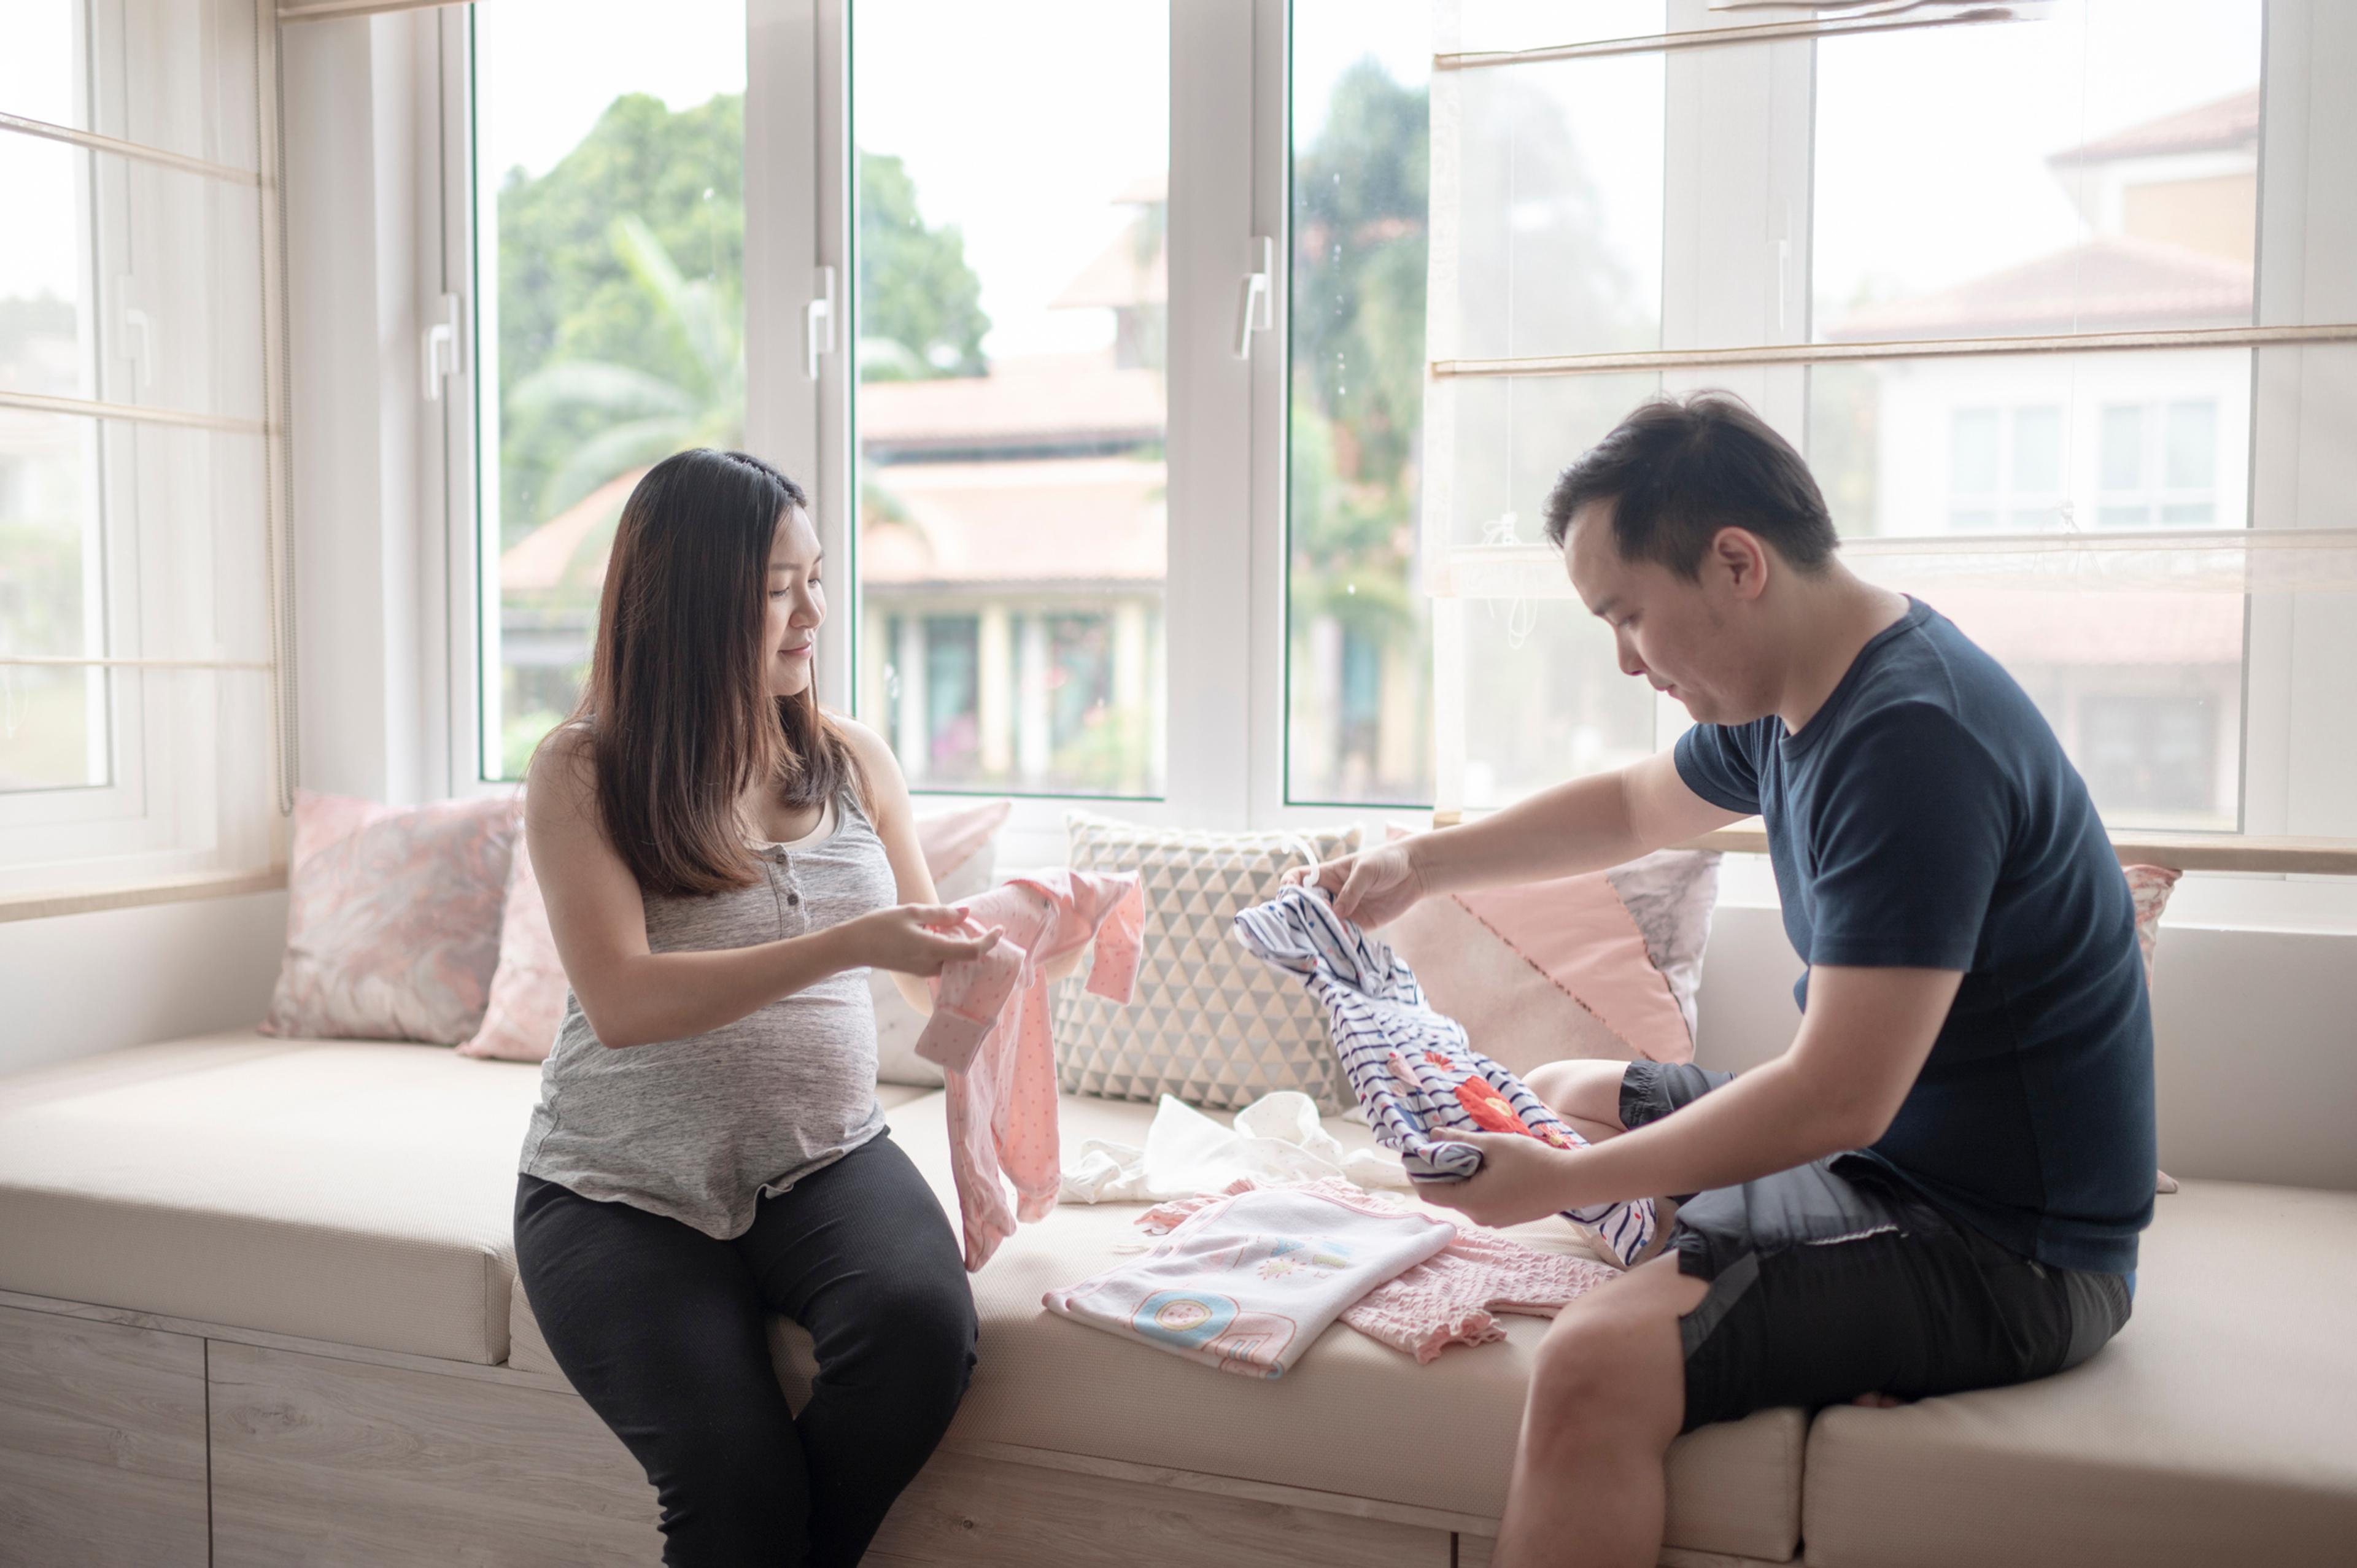 Pregnant woman sorts baby clothes with the father to be